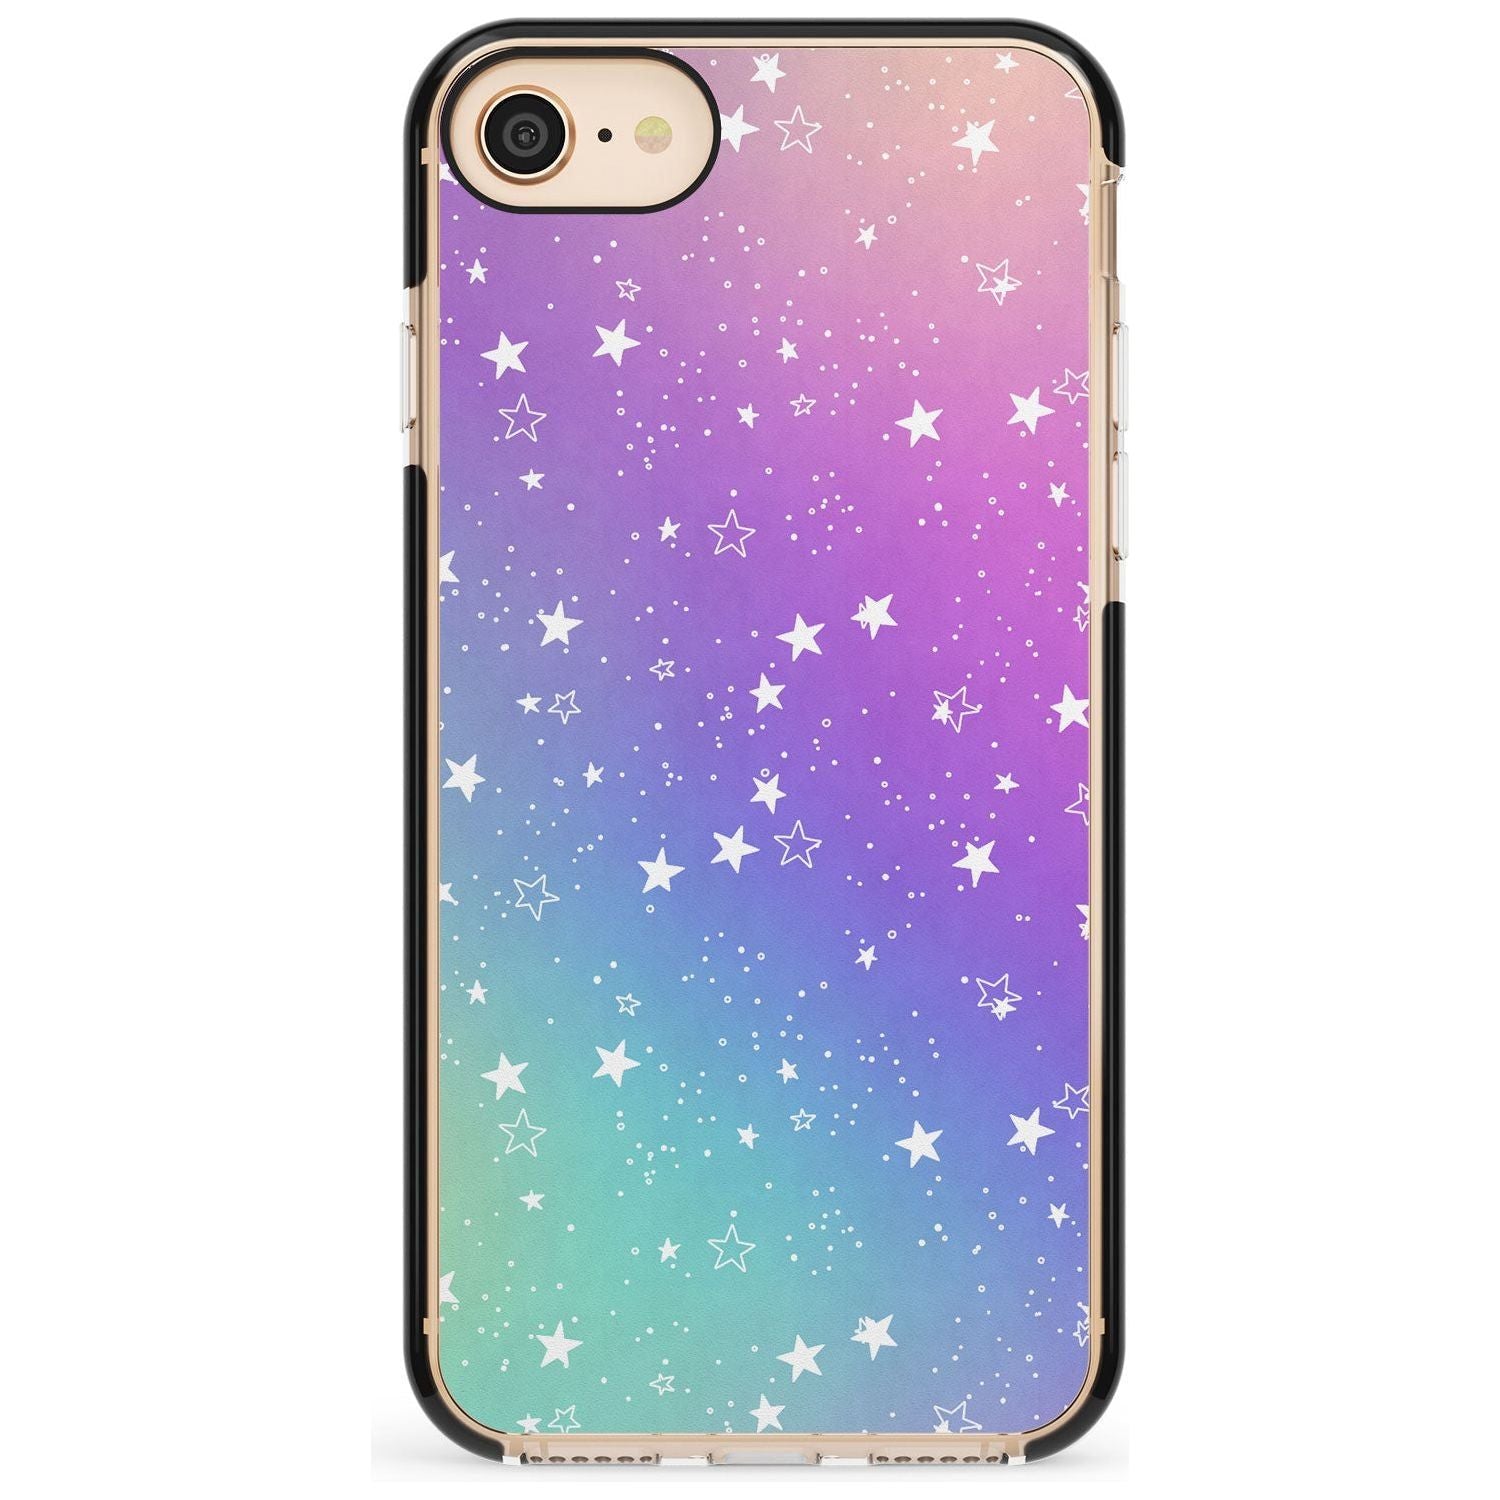 White Stars on Pastels Pink Fade Impact Phone Case for iPhone SE 8 7 Plus